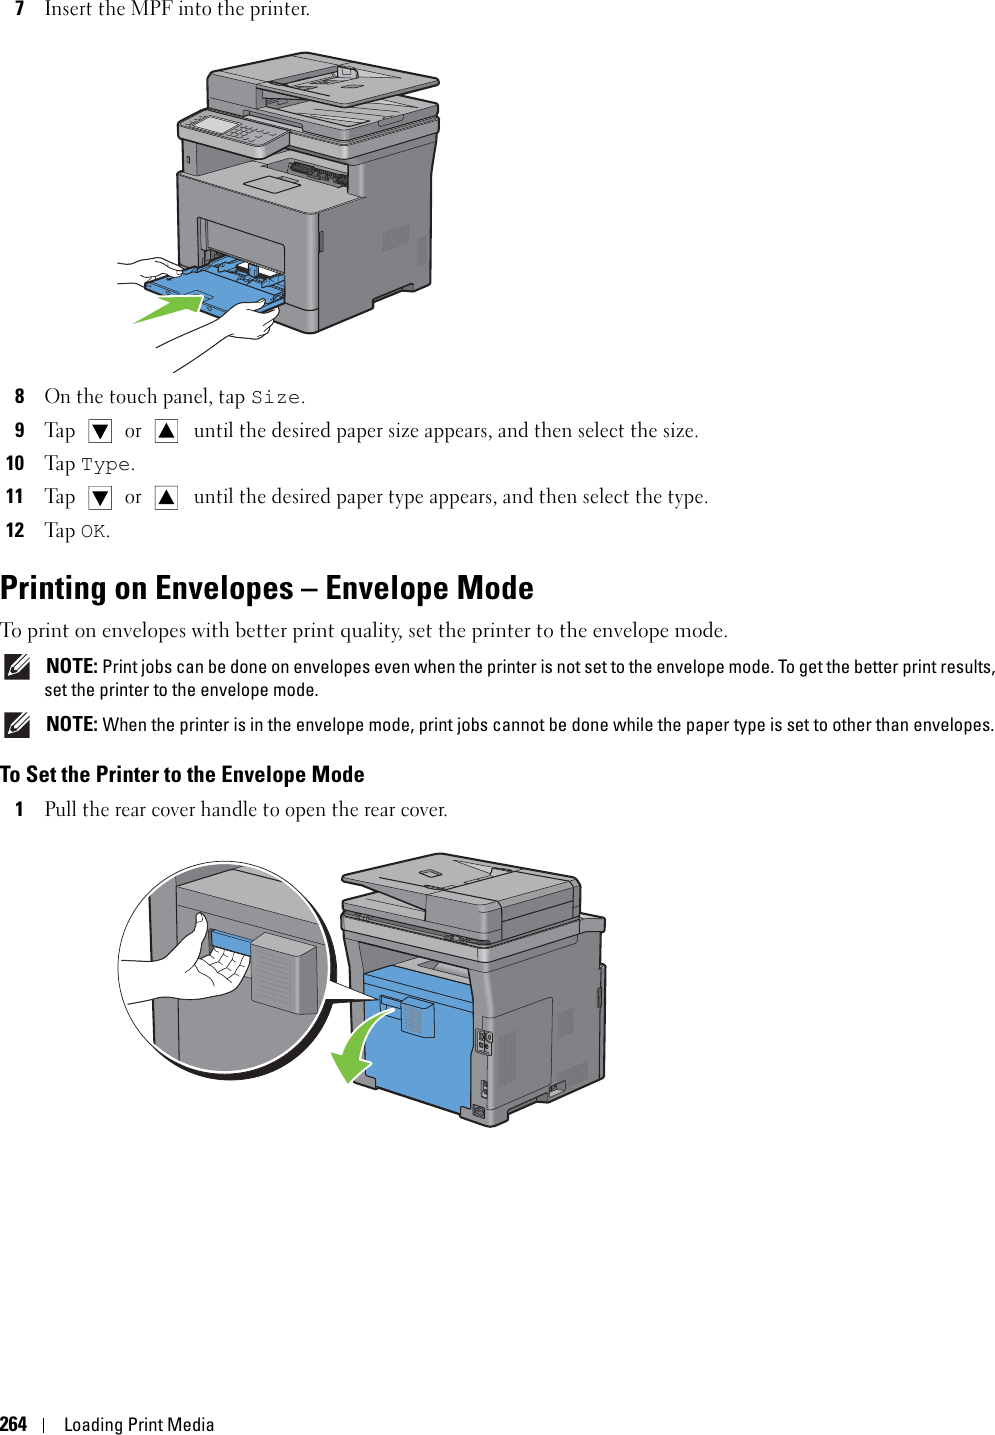 264Loading Print Media7Insert the MPF into the printer.8On the touch panel, tap Size. 9Ta p   or  until the desired paper size appears, and then select the size.10Ta p  Type. 11Ta p   or  until the desired paper type appears, and then select the type.12Ta p  OK.Printing on Envelopes – Envelope ModeTo print on envelopes with better print quality, set the printer to the envelope mode.  NOTE: Print jobs can be done on envelopes even when the printer is not set to the envelope mode. To get the better print results, set the printer to the envelope mode. NOTE: When the printer is in the envelope mode, print jobs cannot be done while the paper type is set to other than envelopes.To Set the Printer to the Envelope Mode1Pull the rear cover handle to open the rear cover.